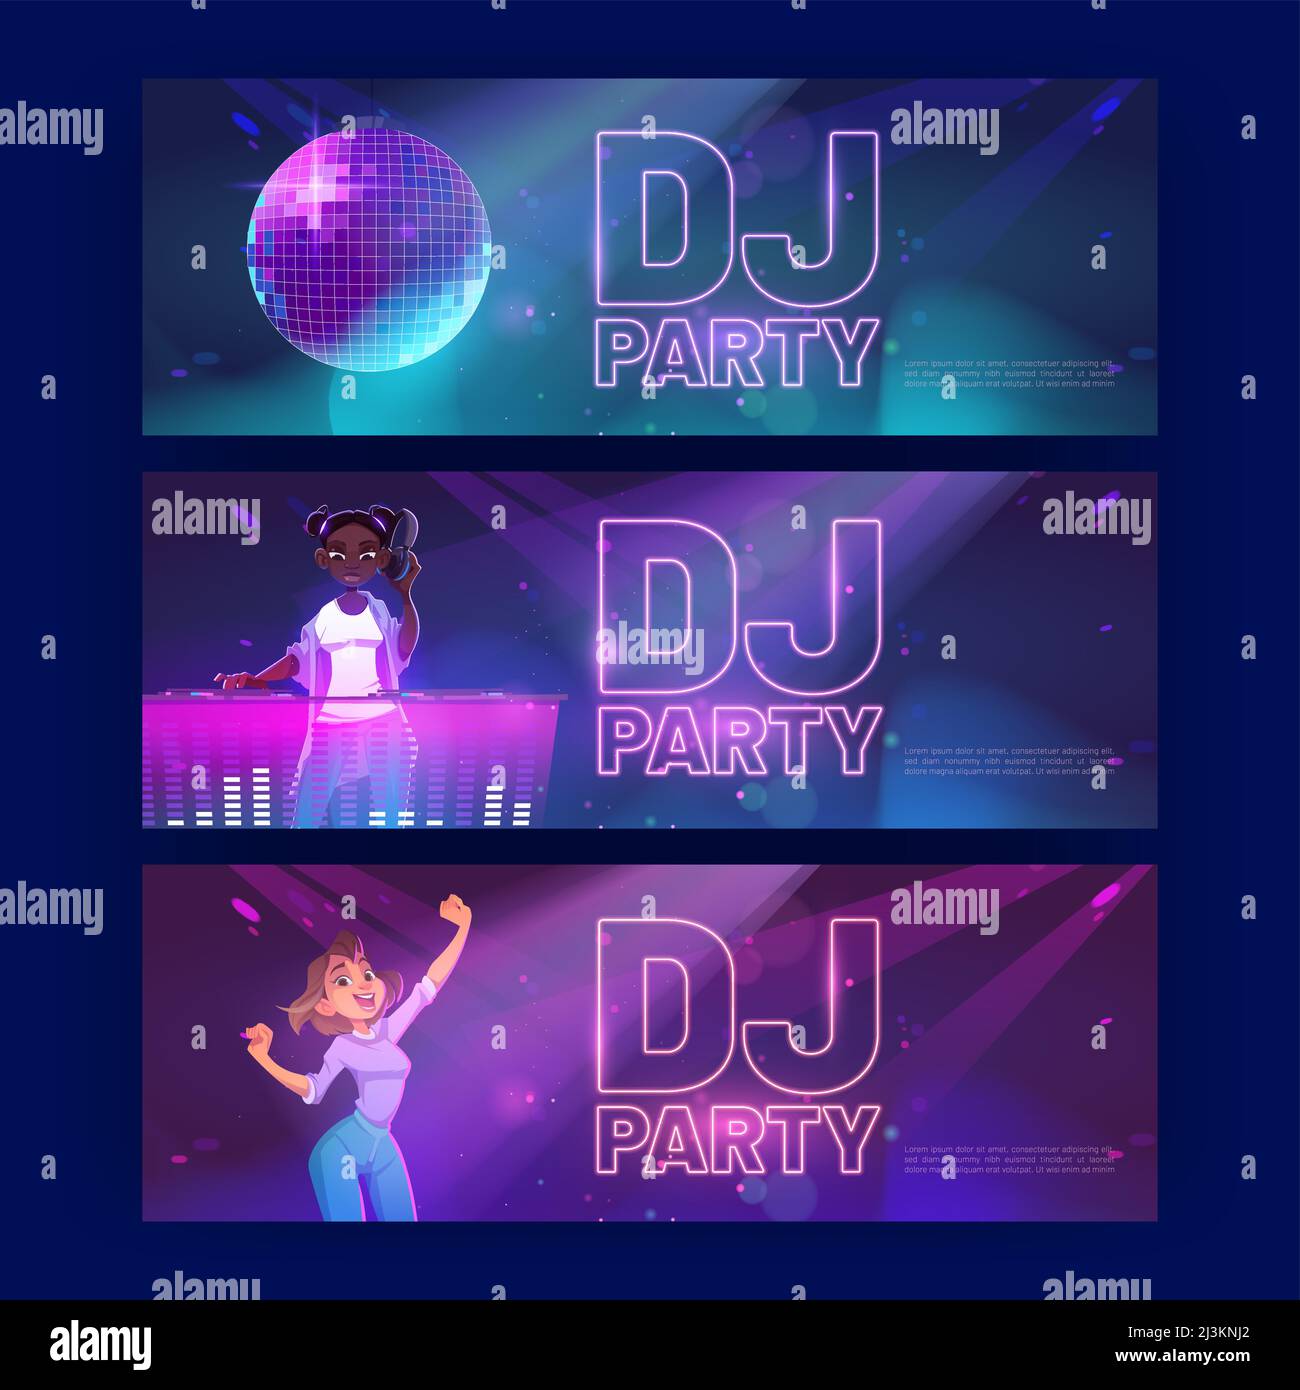 Dj party banners with disco ball, girl dance and mixer console. Vector invitation flyers to nightclub, music club, discotheque with cartoon illustrati Stock Vector